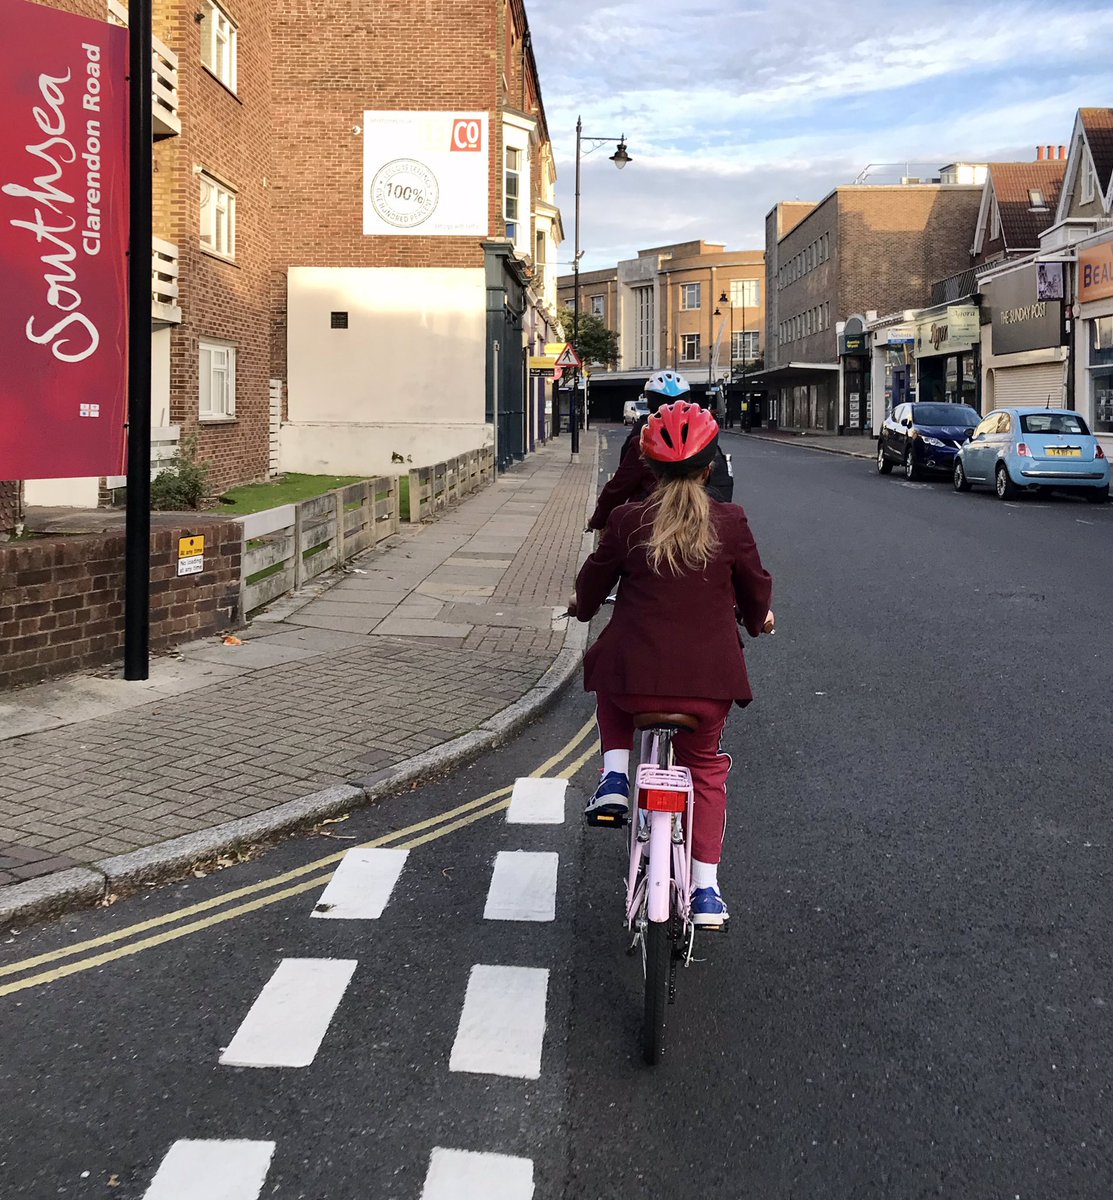 The school run by bike: a first for us! #ActiveSchoolTravel #TravelSafely #Southsea #Portsmouth #BackToSchool2020